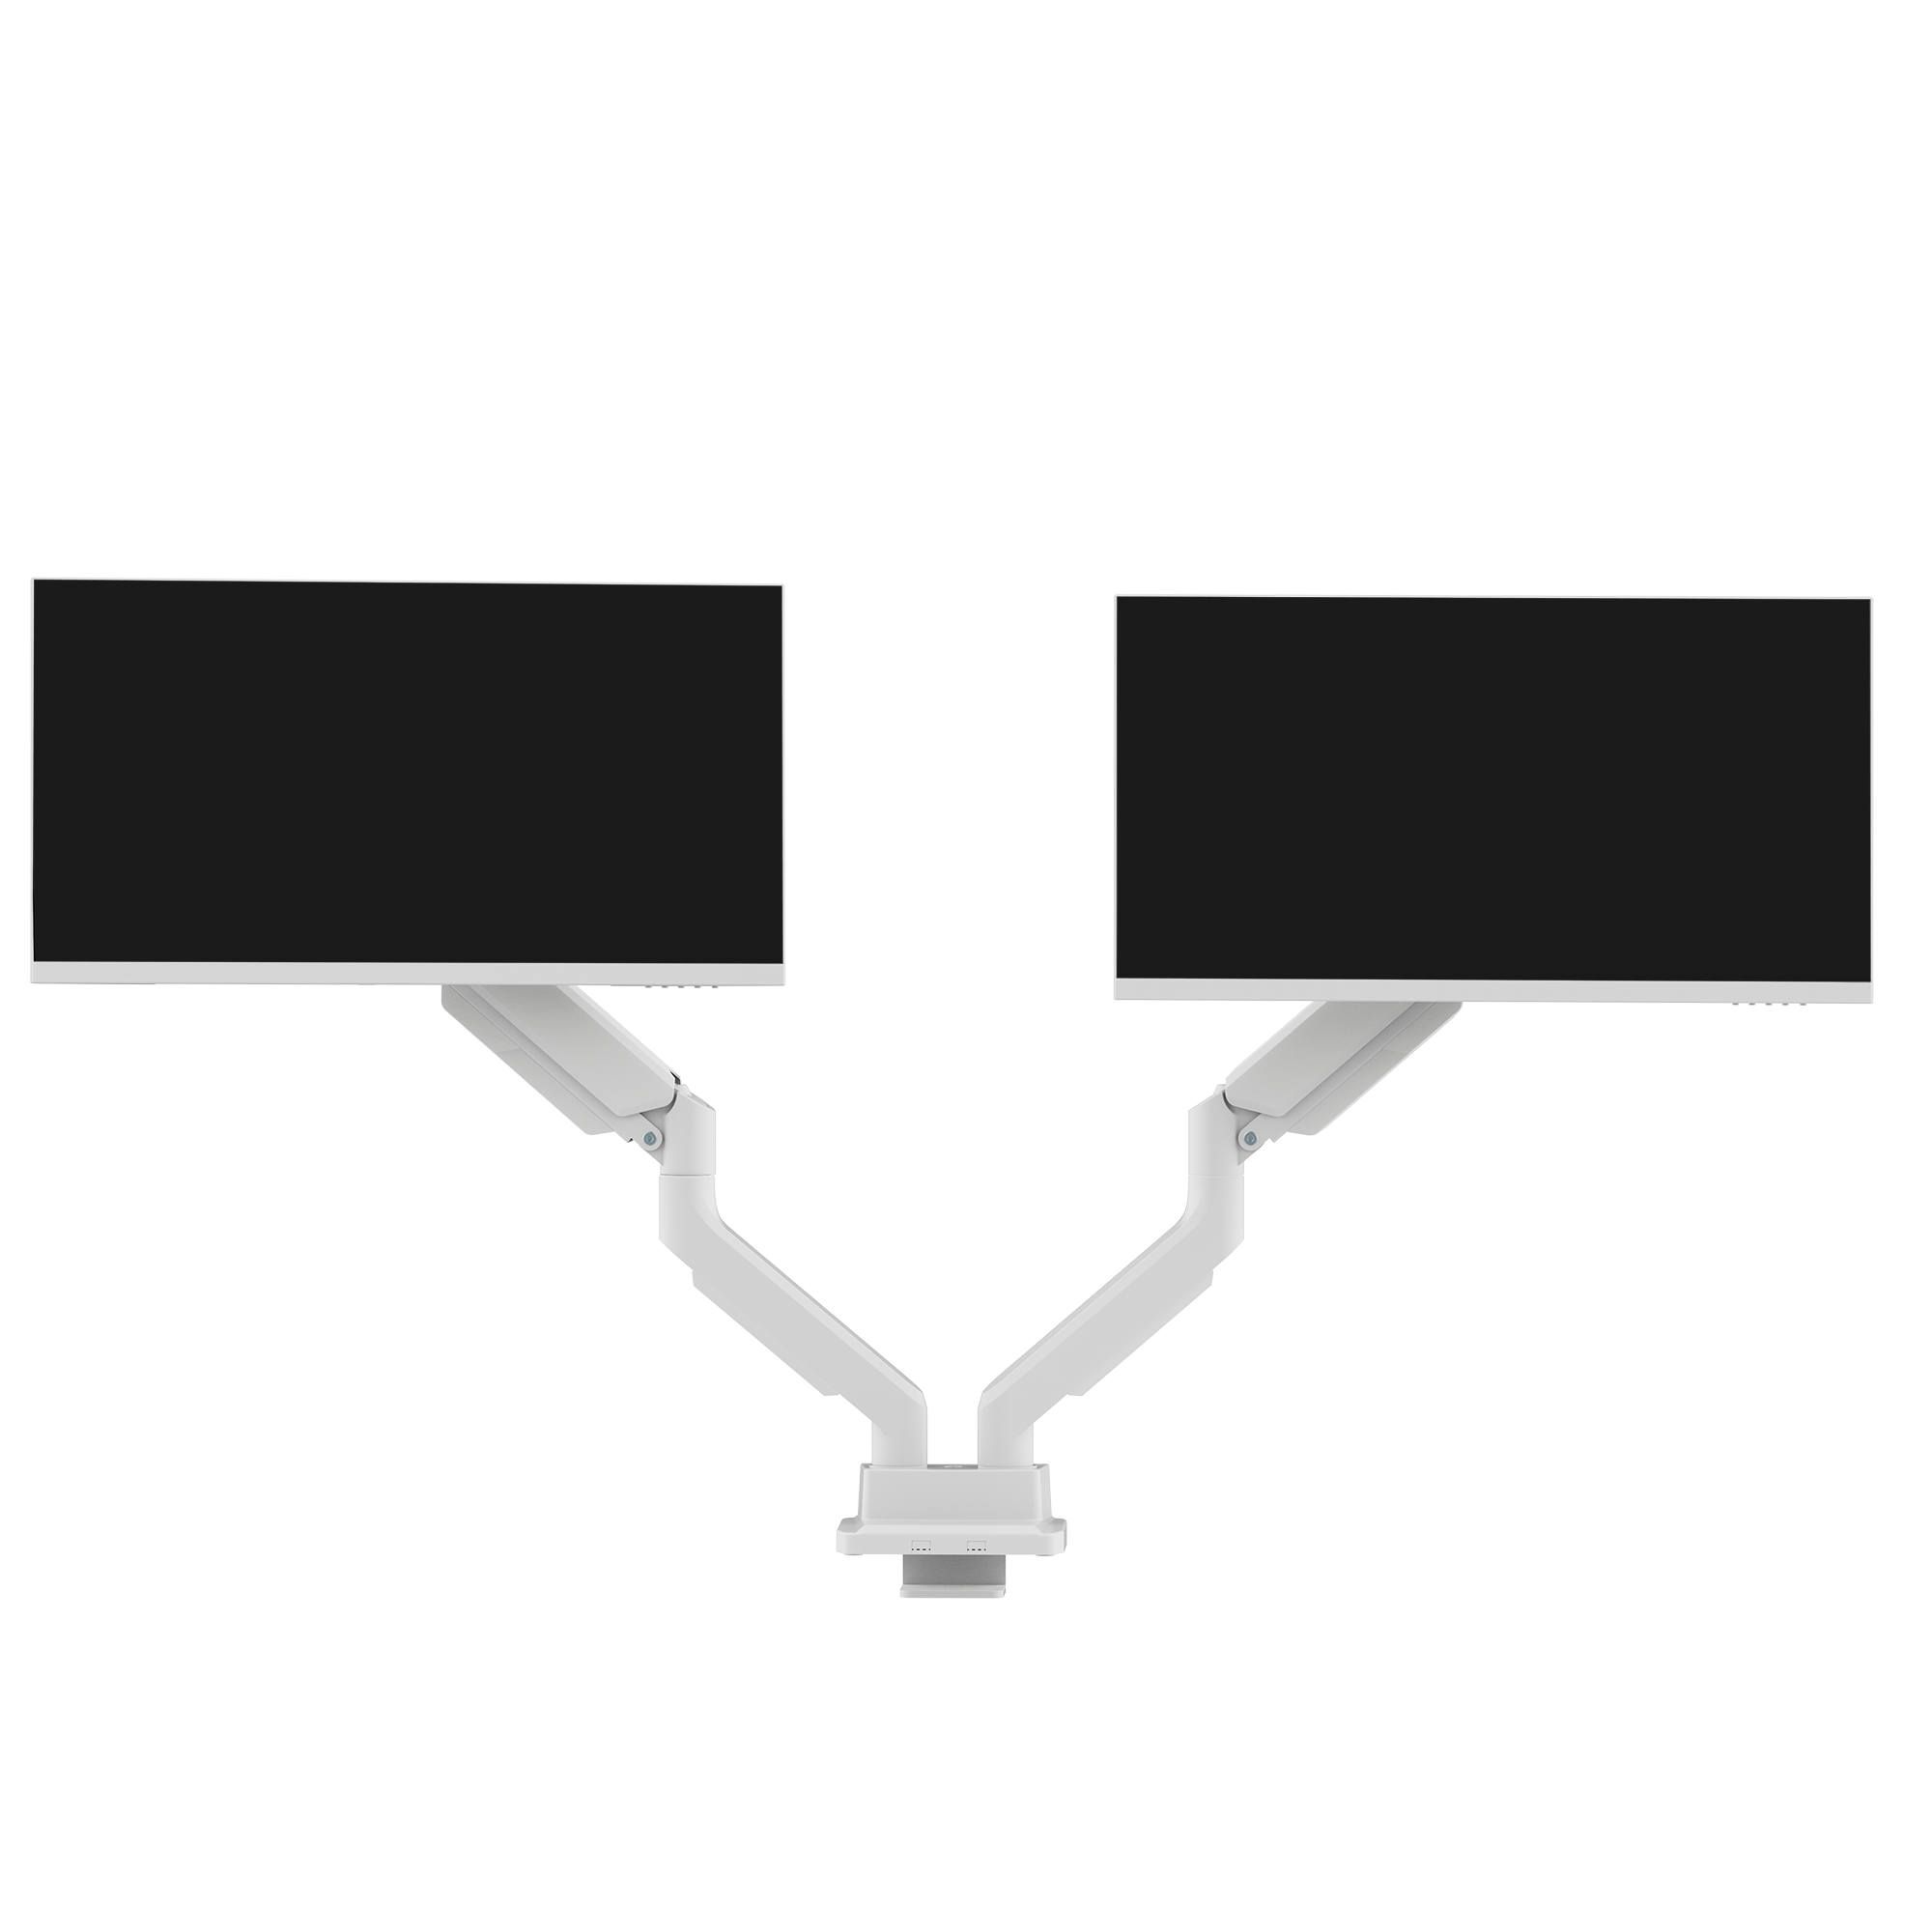 PS2D White Dual Monitor Arm Mount